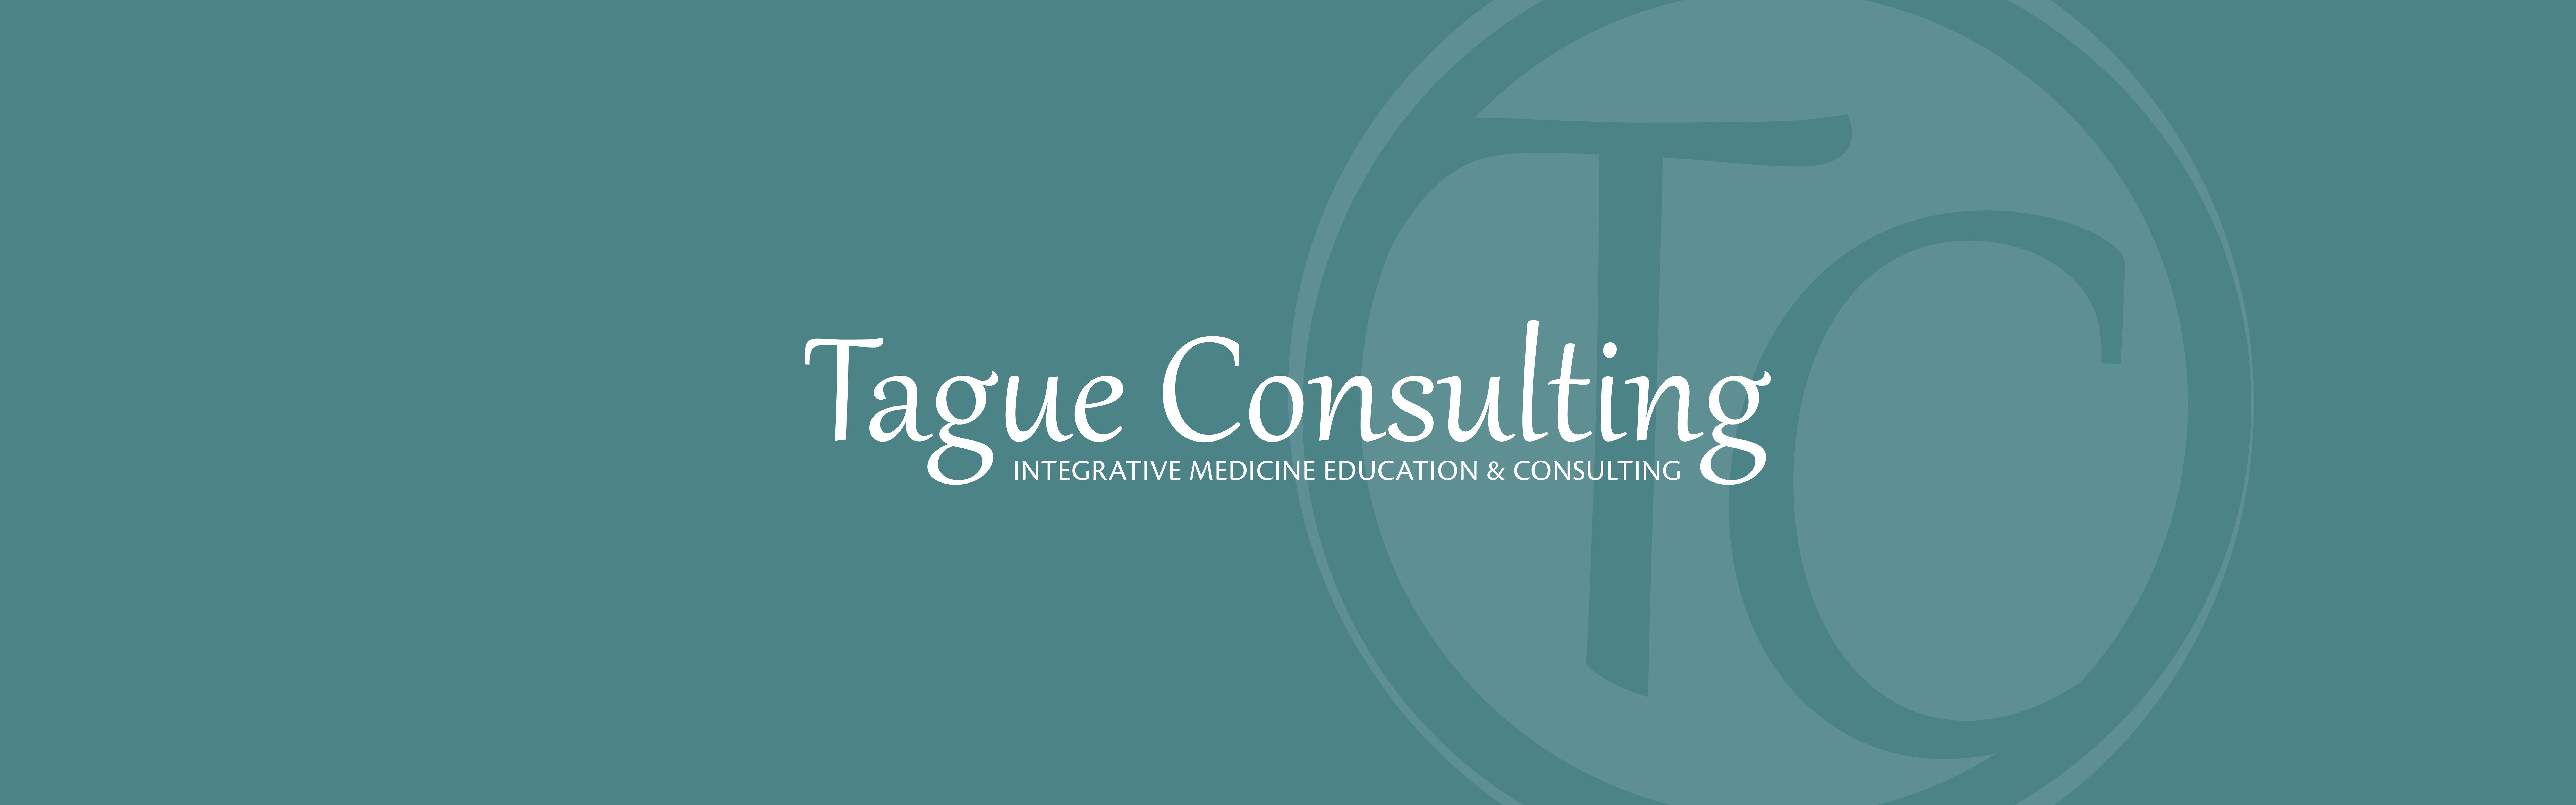 The image displays a logo with the text "Tague Consulting" alongside the subtitle "integrative medicine education & consulting." The logo features an abstract design or monogram that incorporates the letters "TC".